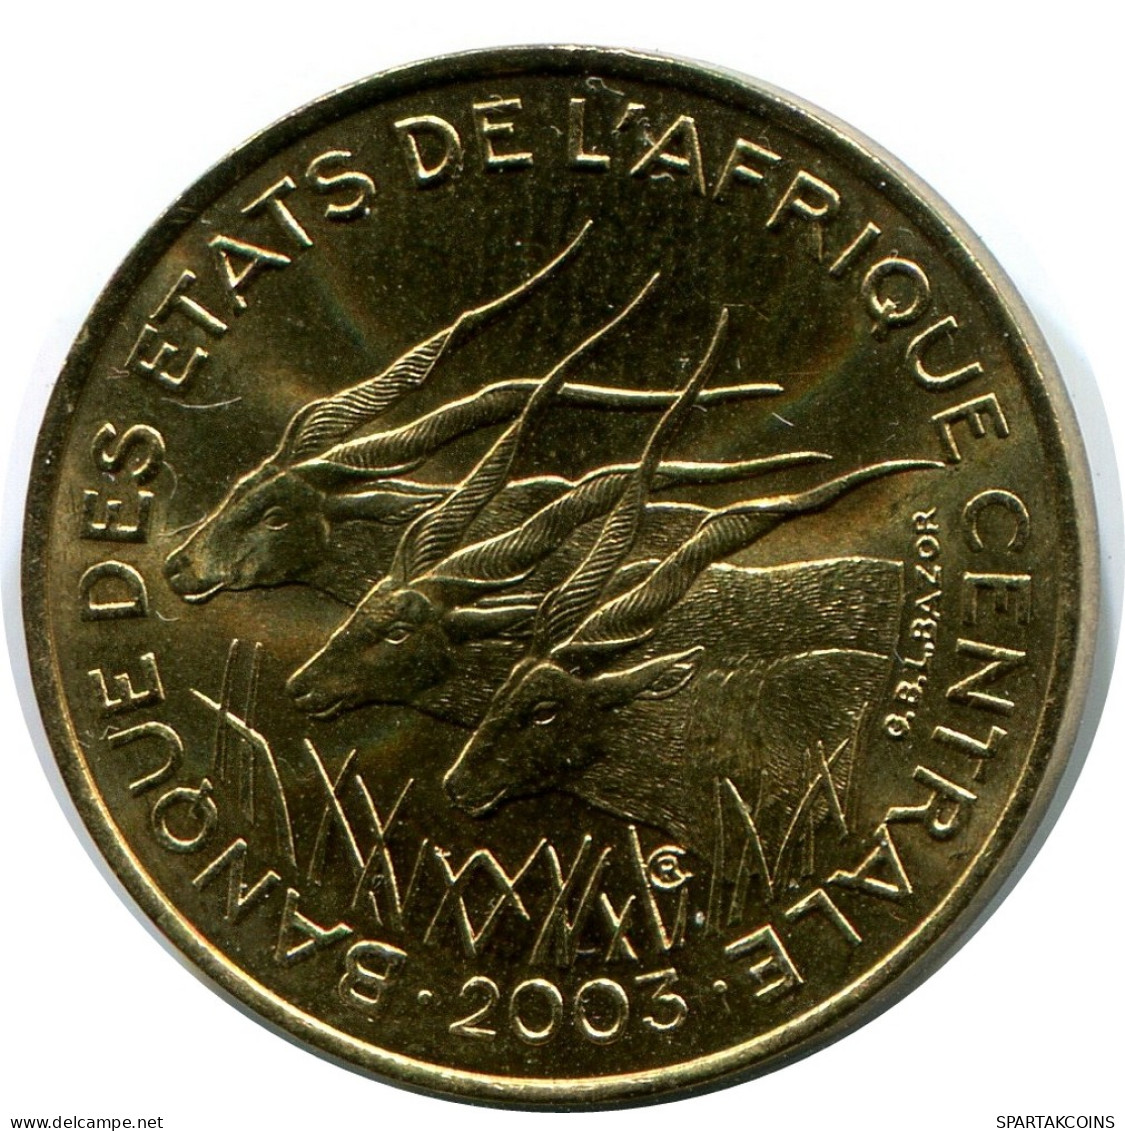 5 FRANCS CFA 2003 CENTRAL AFRICAN STATES (BEAC) Münze #AP859.D - Central African Republic